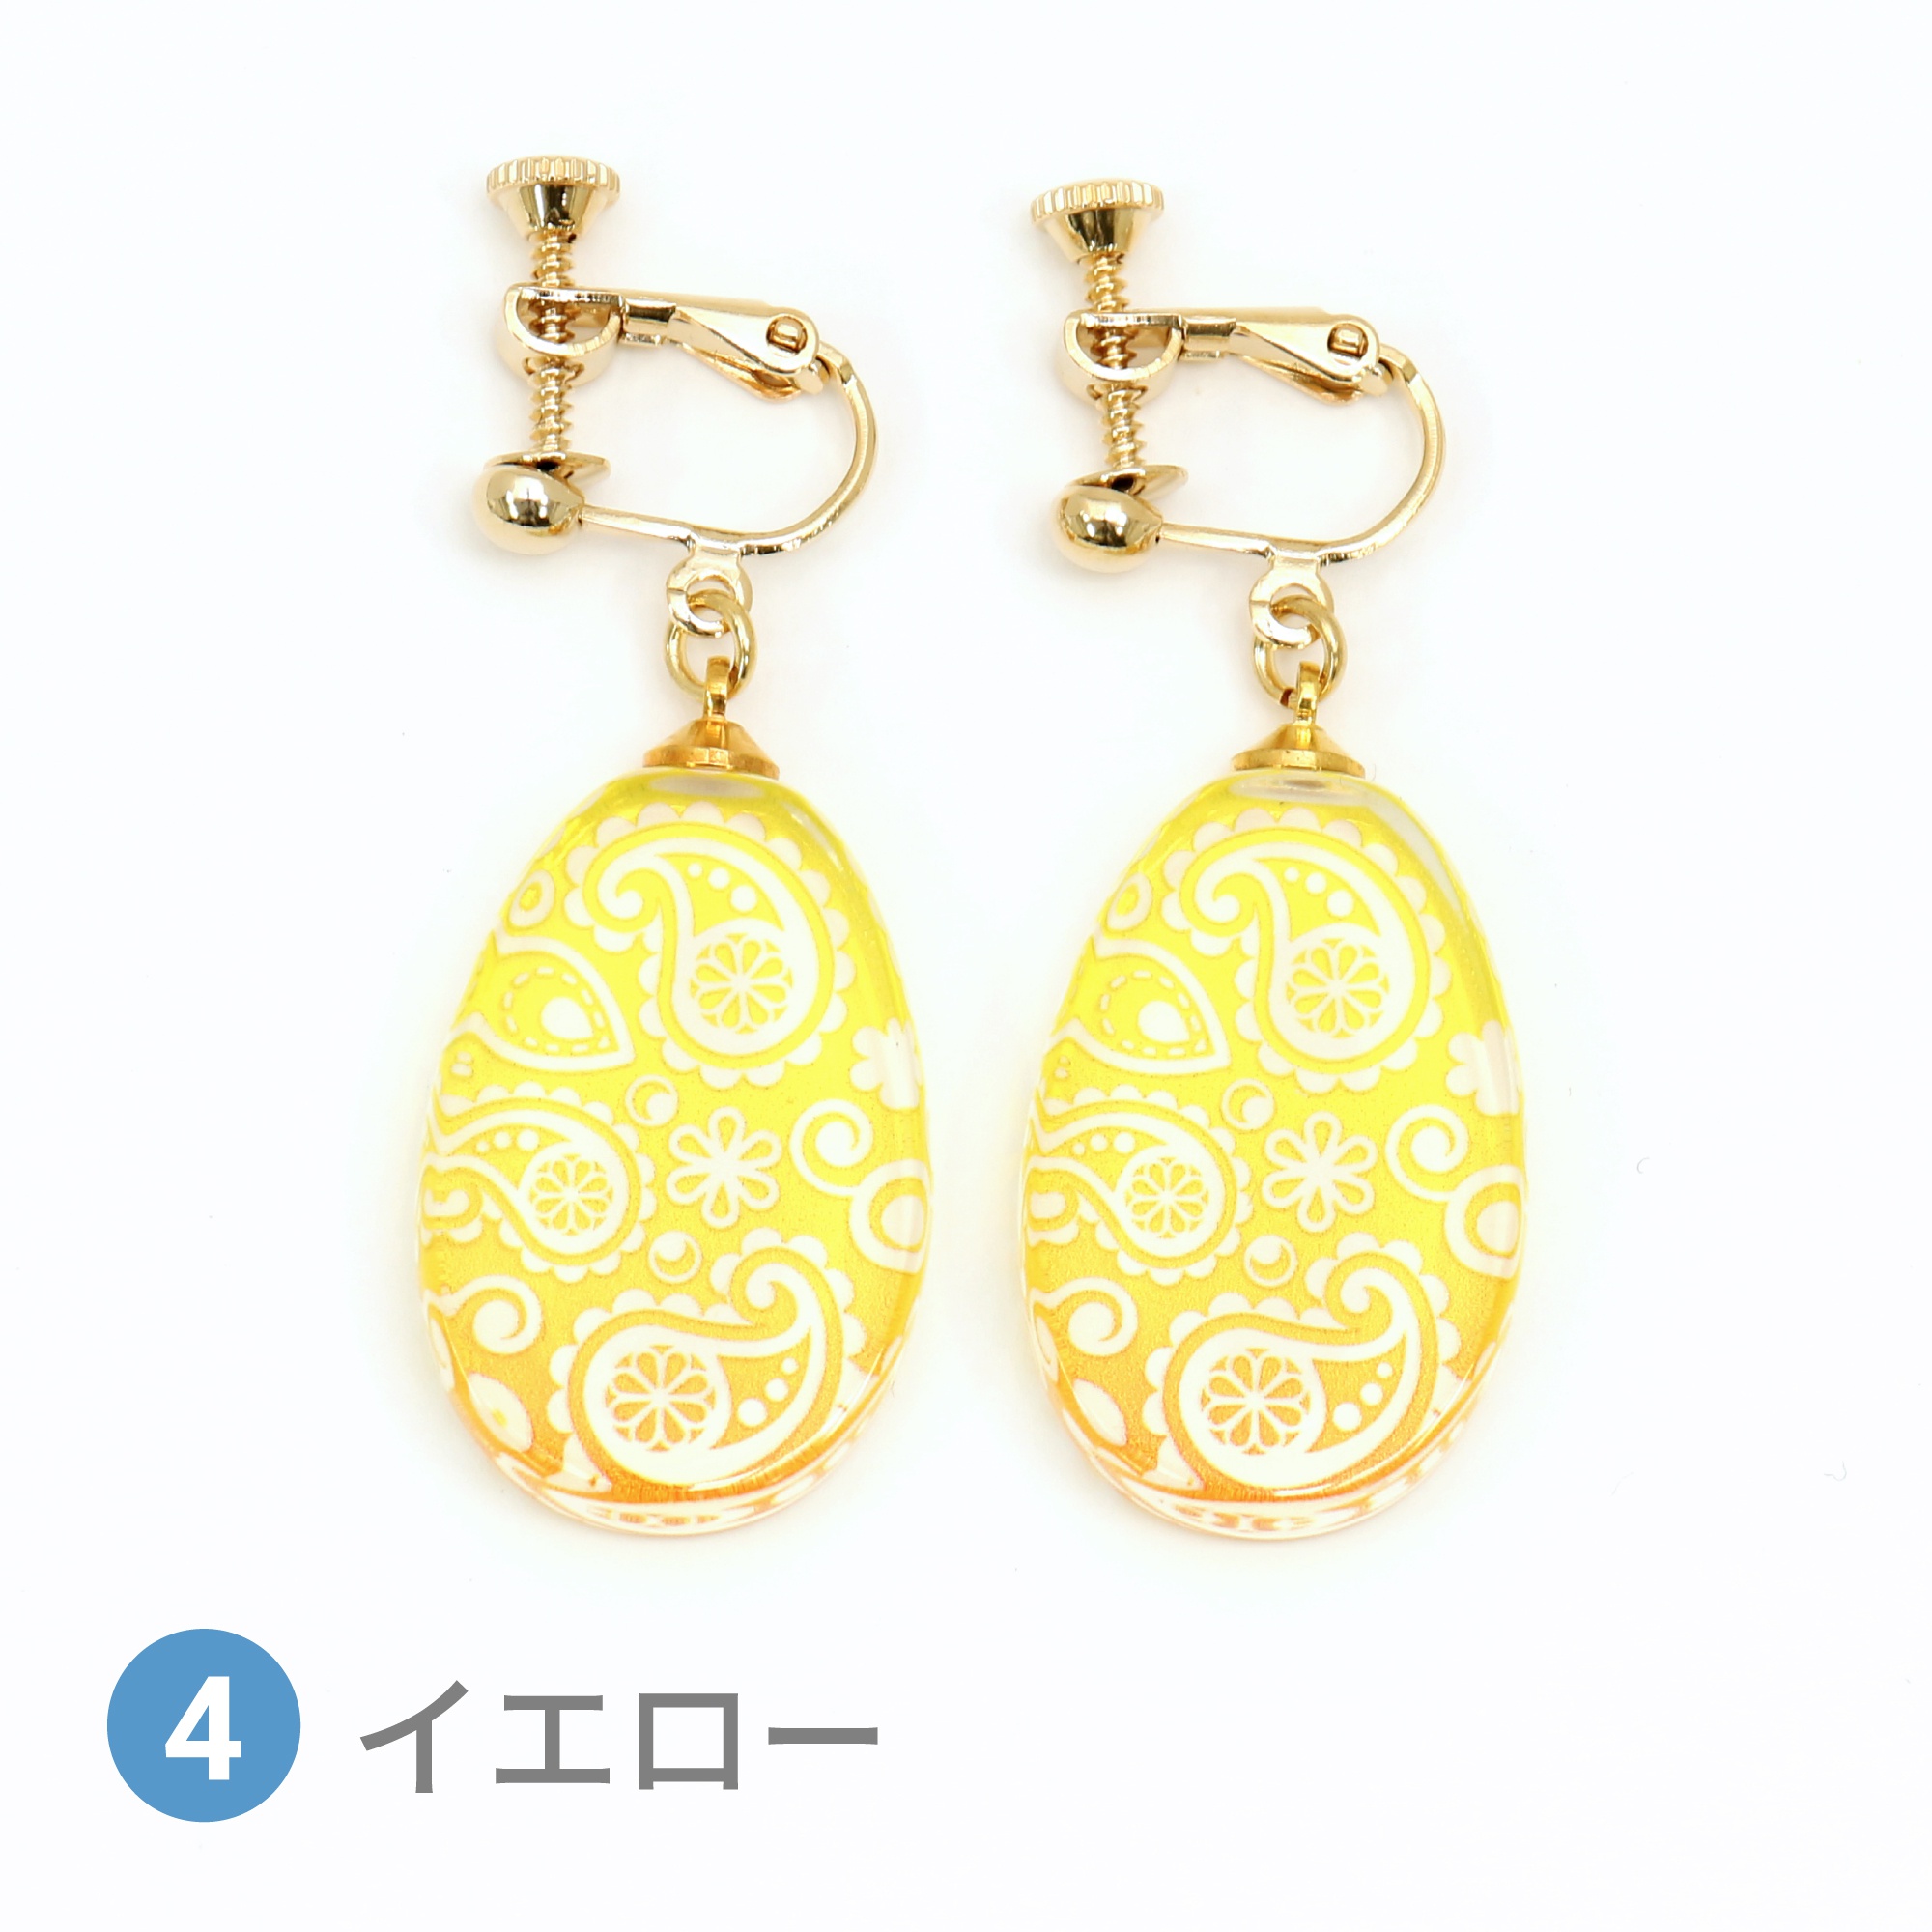 Glass accessories Earring PAISLEY yellow drop shape